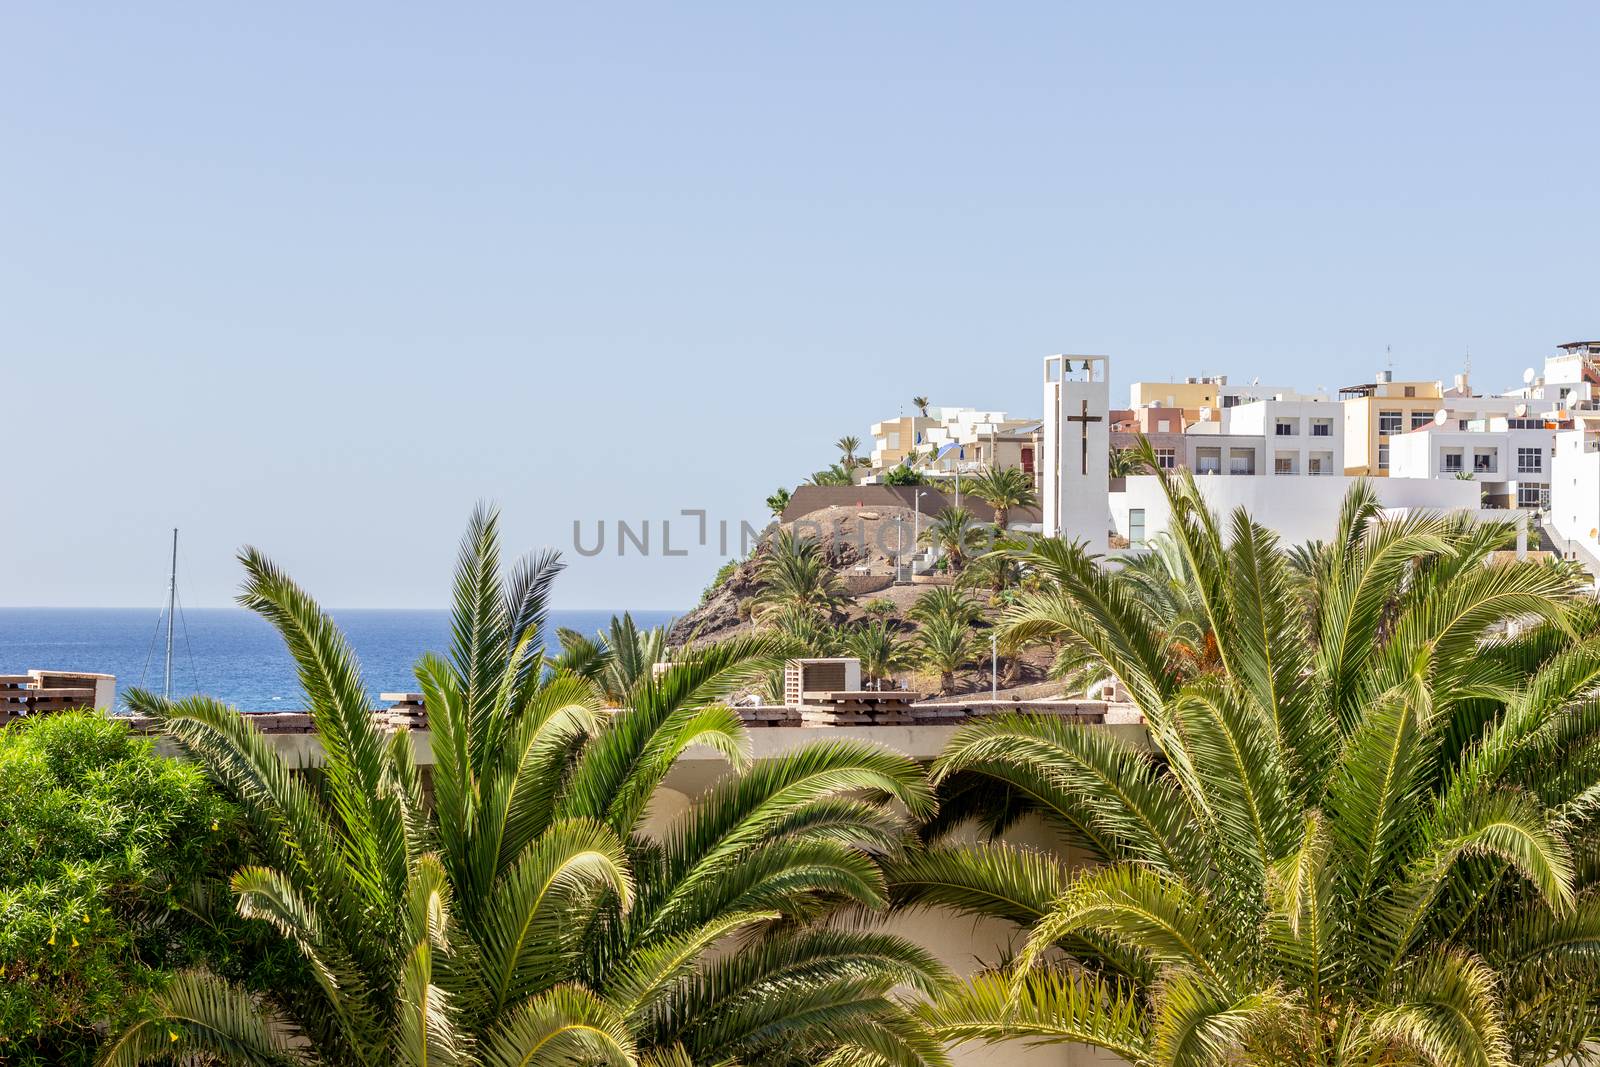 Scenic view at Morro Jable on canary island Fuerteventura, Spain with palm trees and white buildings in the foreground and the atlantic ocean in the background